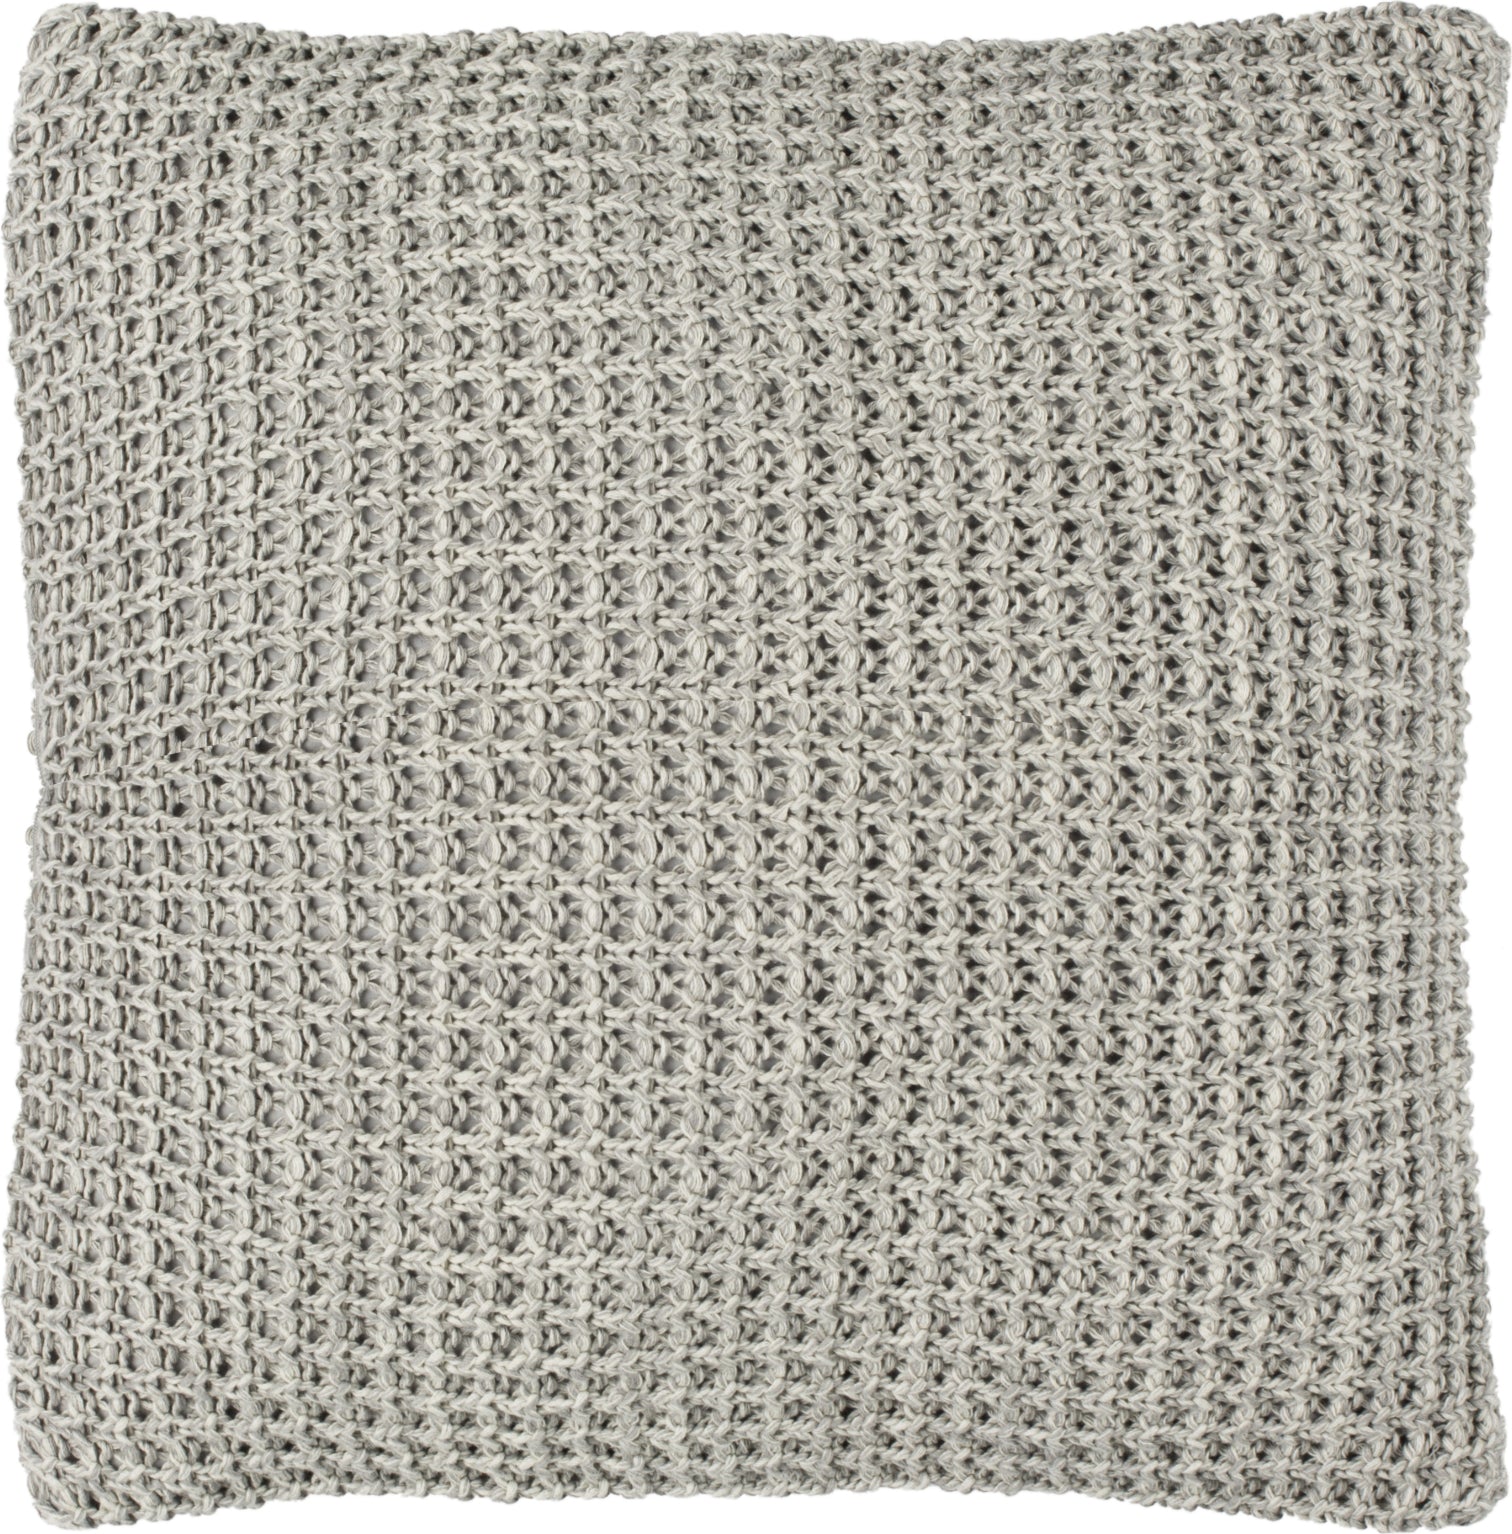 Safavieh Haven Knit Textures and Weaves Light Grey/Natural